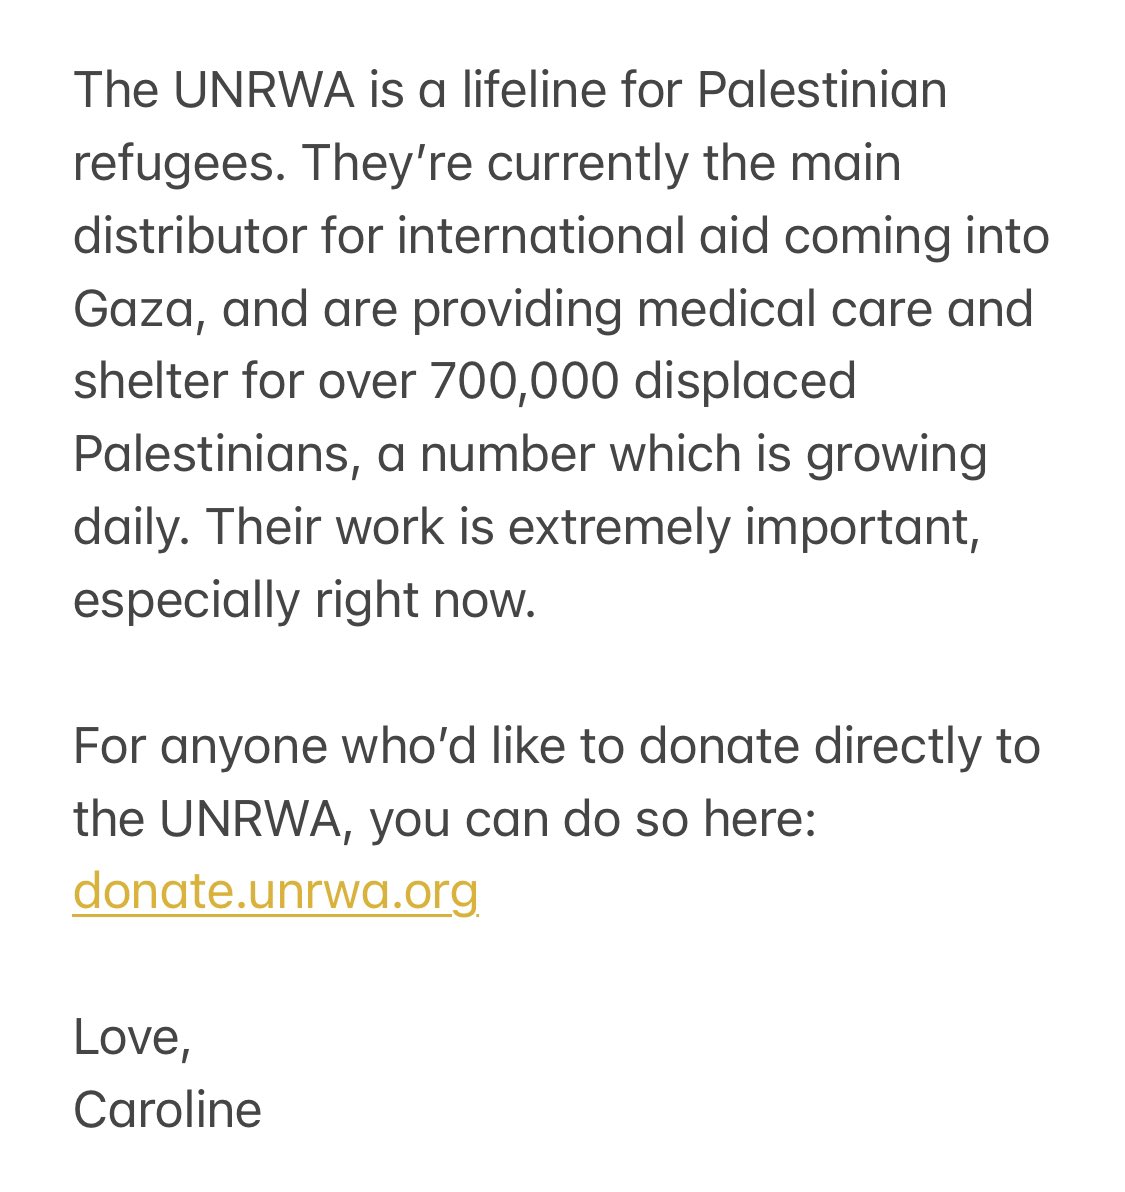 I’m so moved to report back to you that the Dang drop sold a total of 3,088 shirts, raising an astounding $71,000 for the UNRWA My deepest thanks to every one of you who purchased a shirt and contributed to this effort 🕊️ donate.unrwa.org